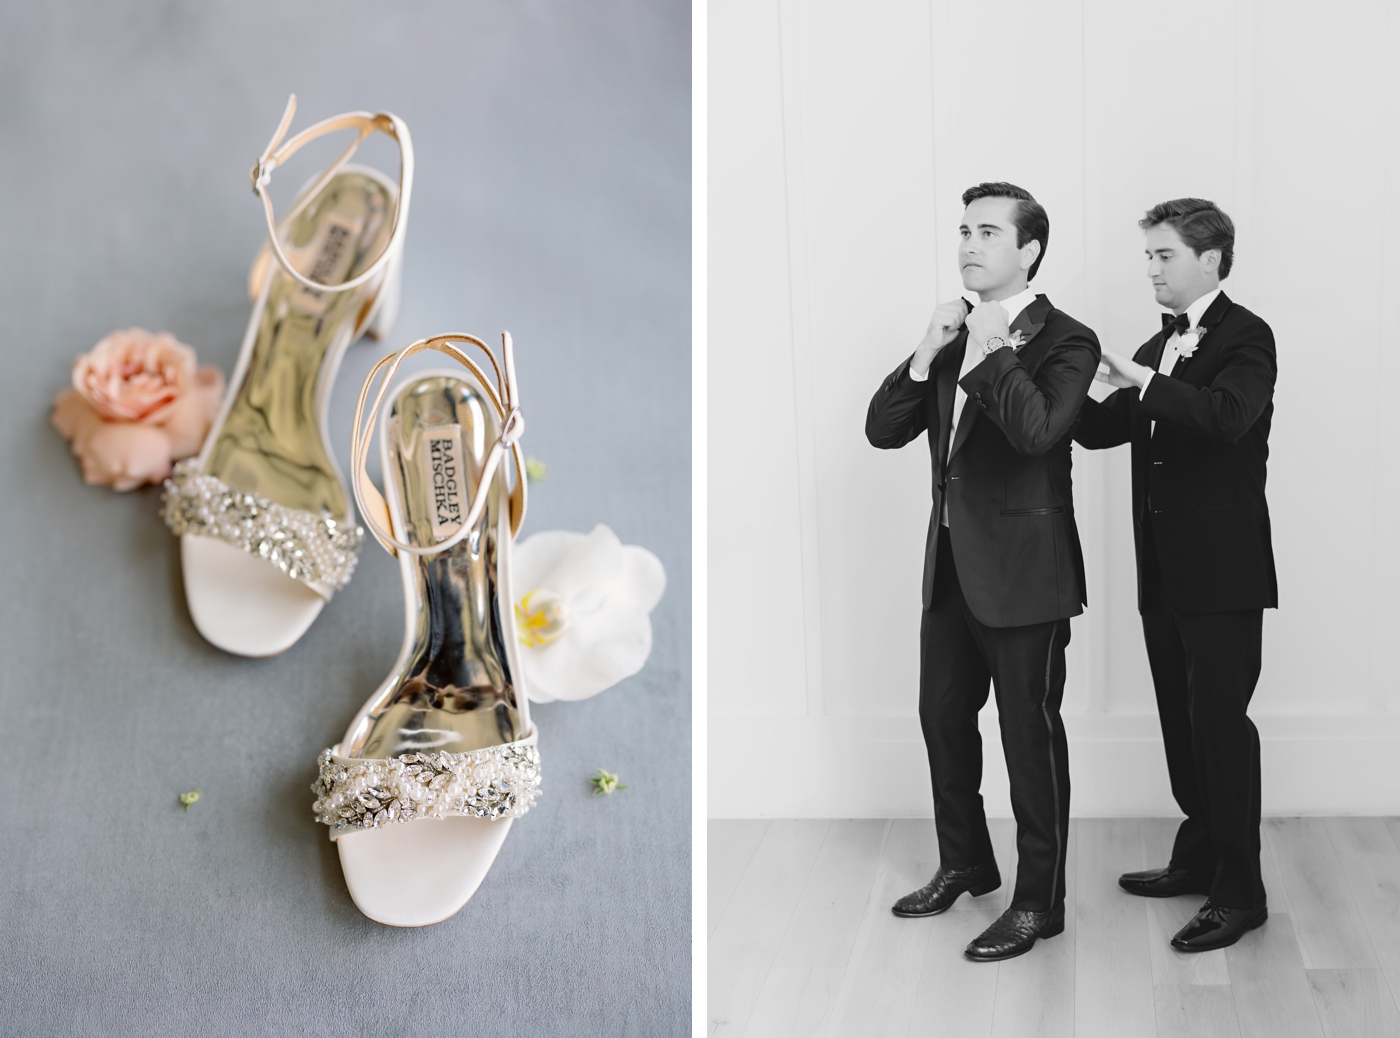 Bridal heels next to the groom getting ready